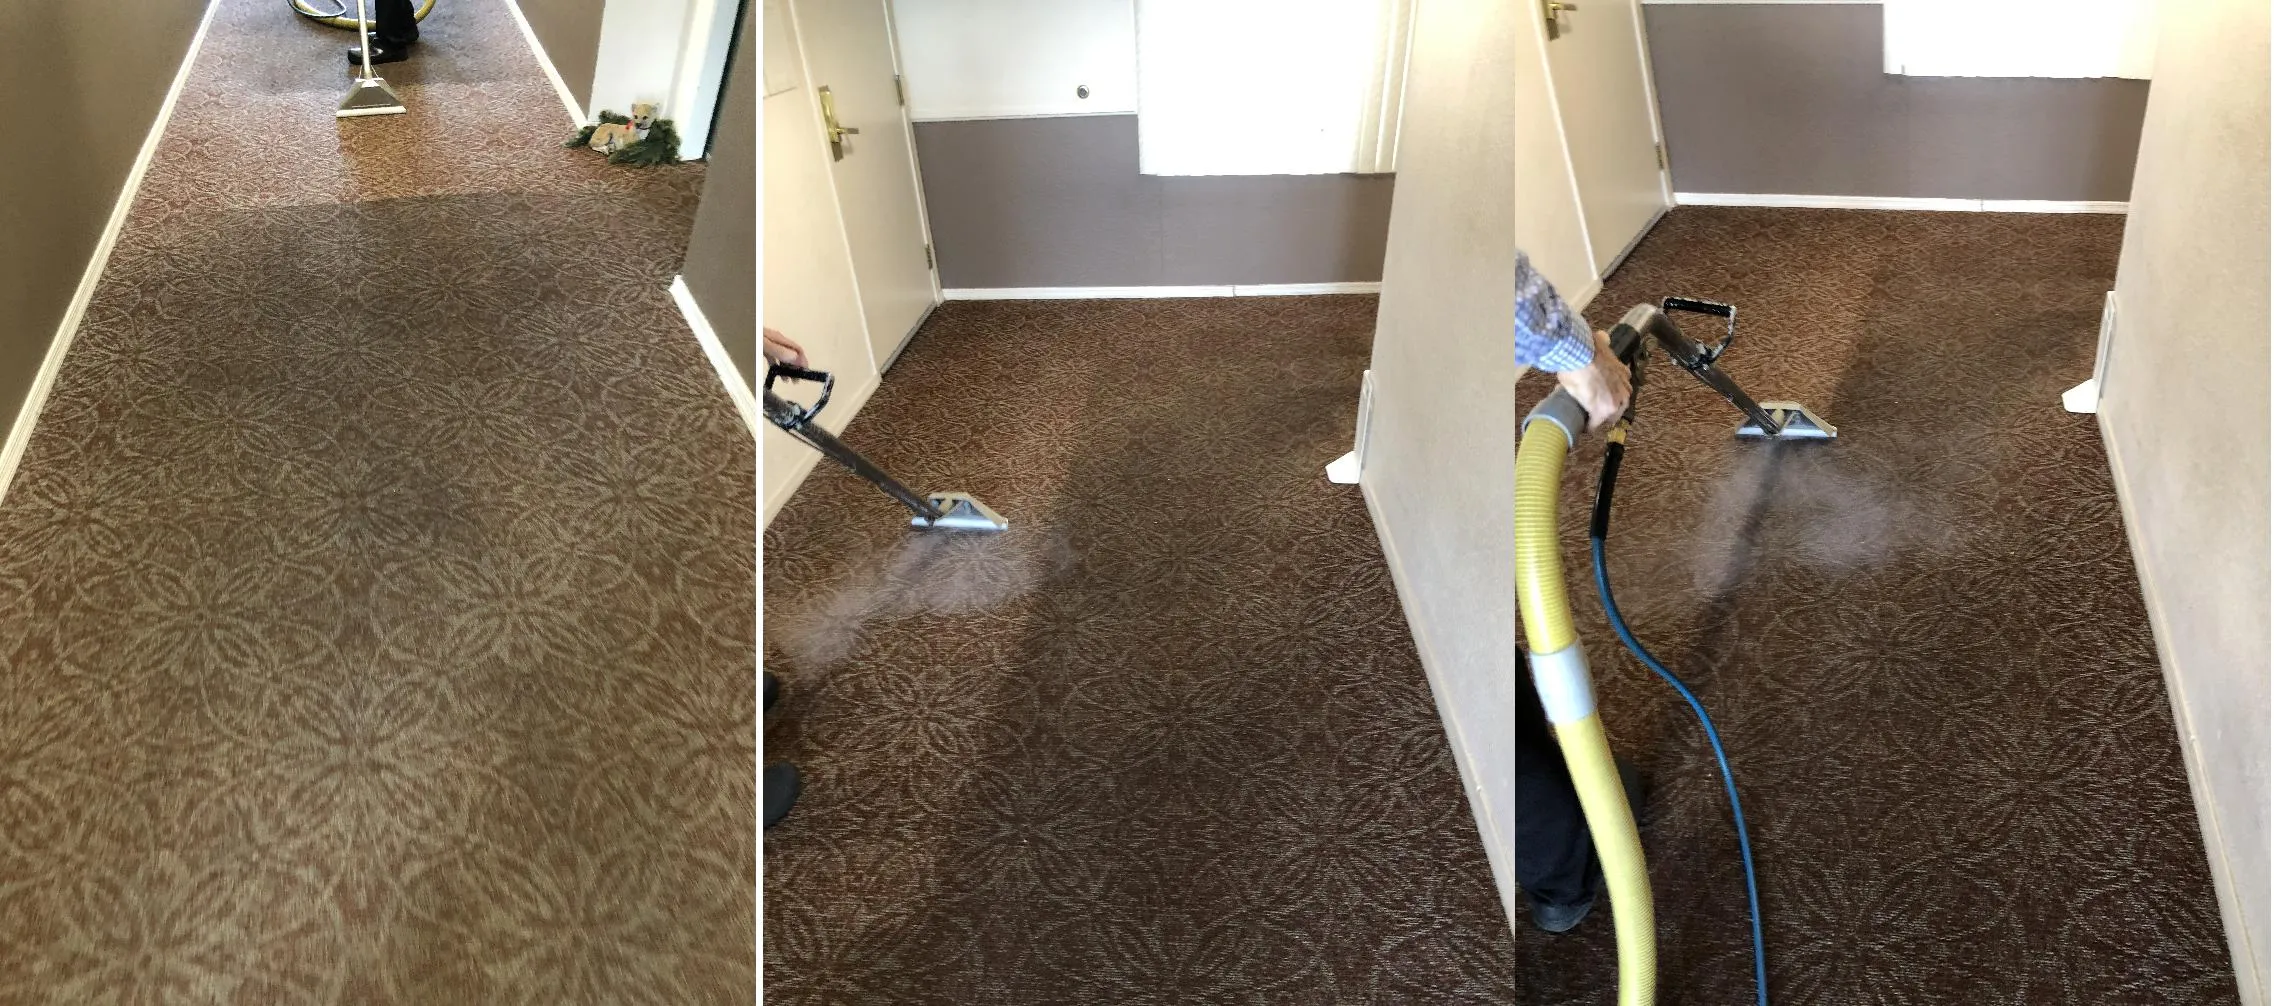 Other Services for TLC Carpet & Tile Cleaners in Surprise, Arizona